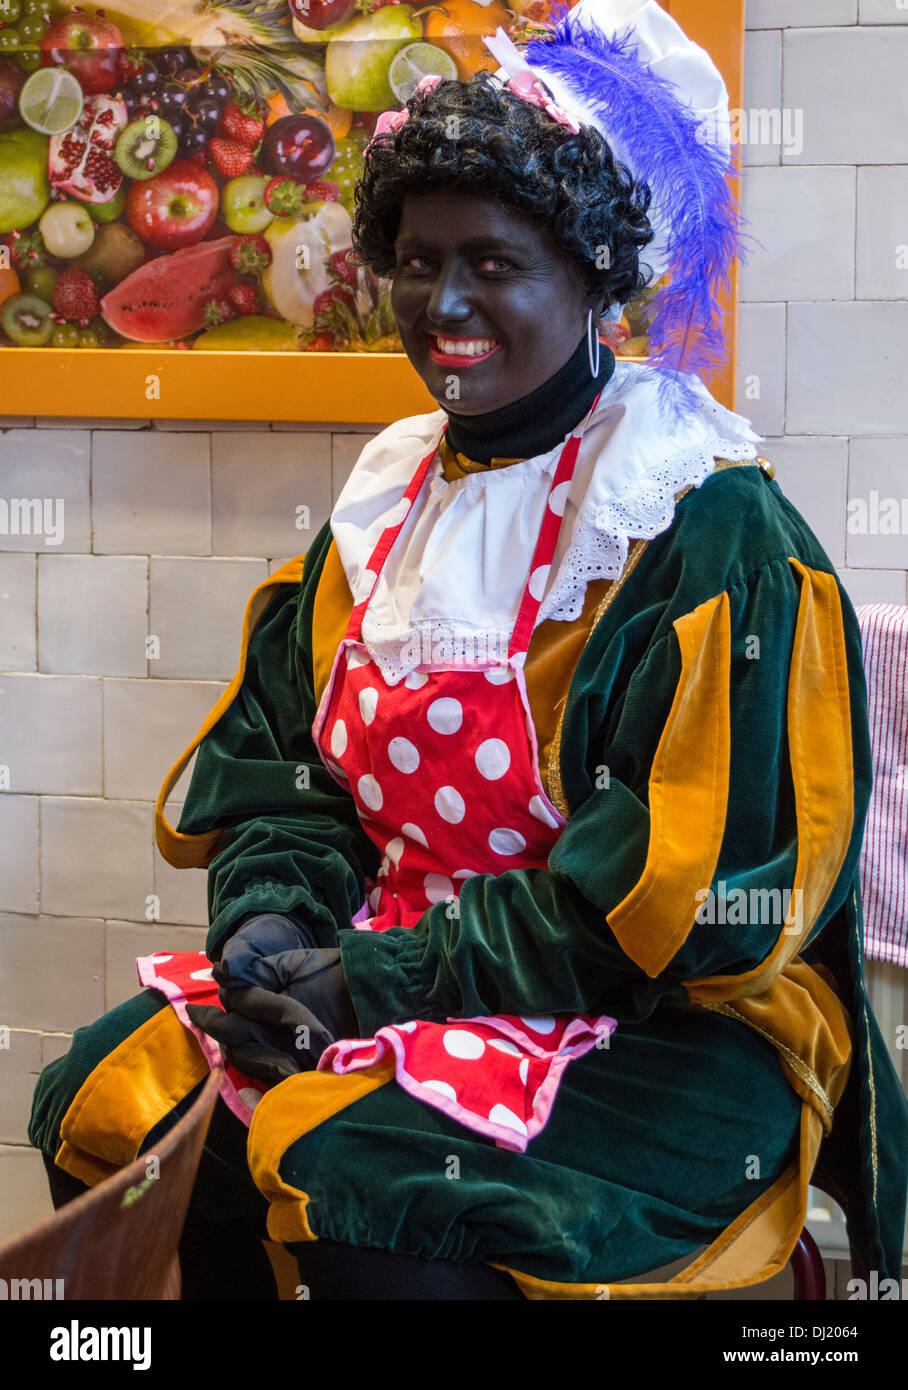 Zwarte Piet High Resolution Stock Photography and Images - Alamy